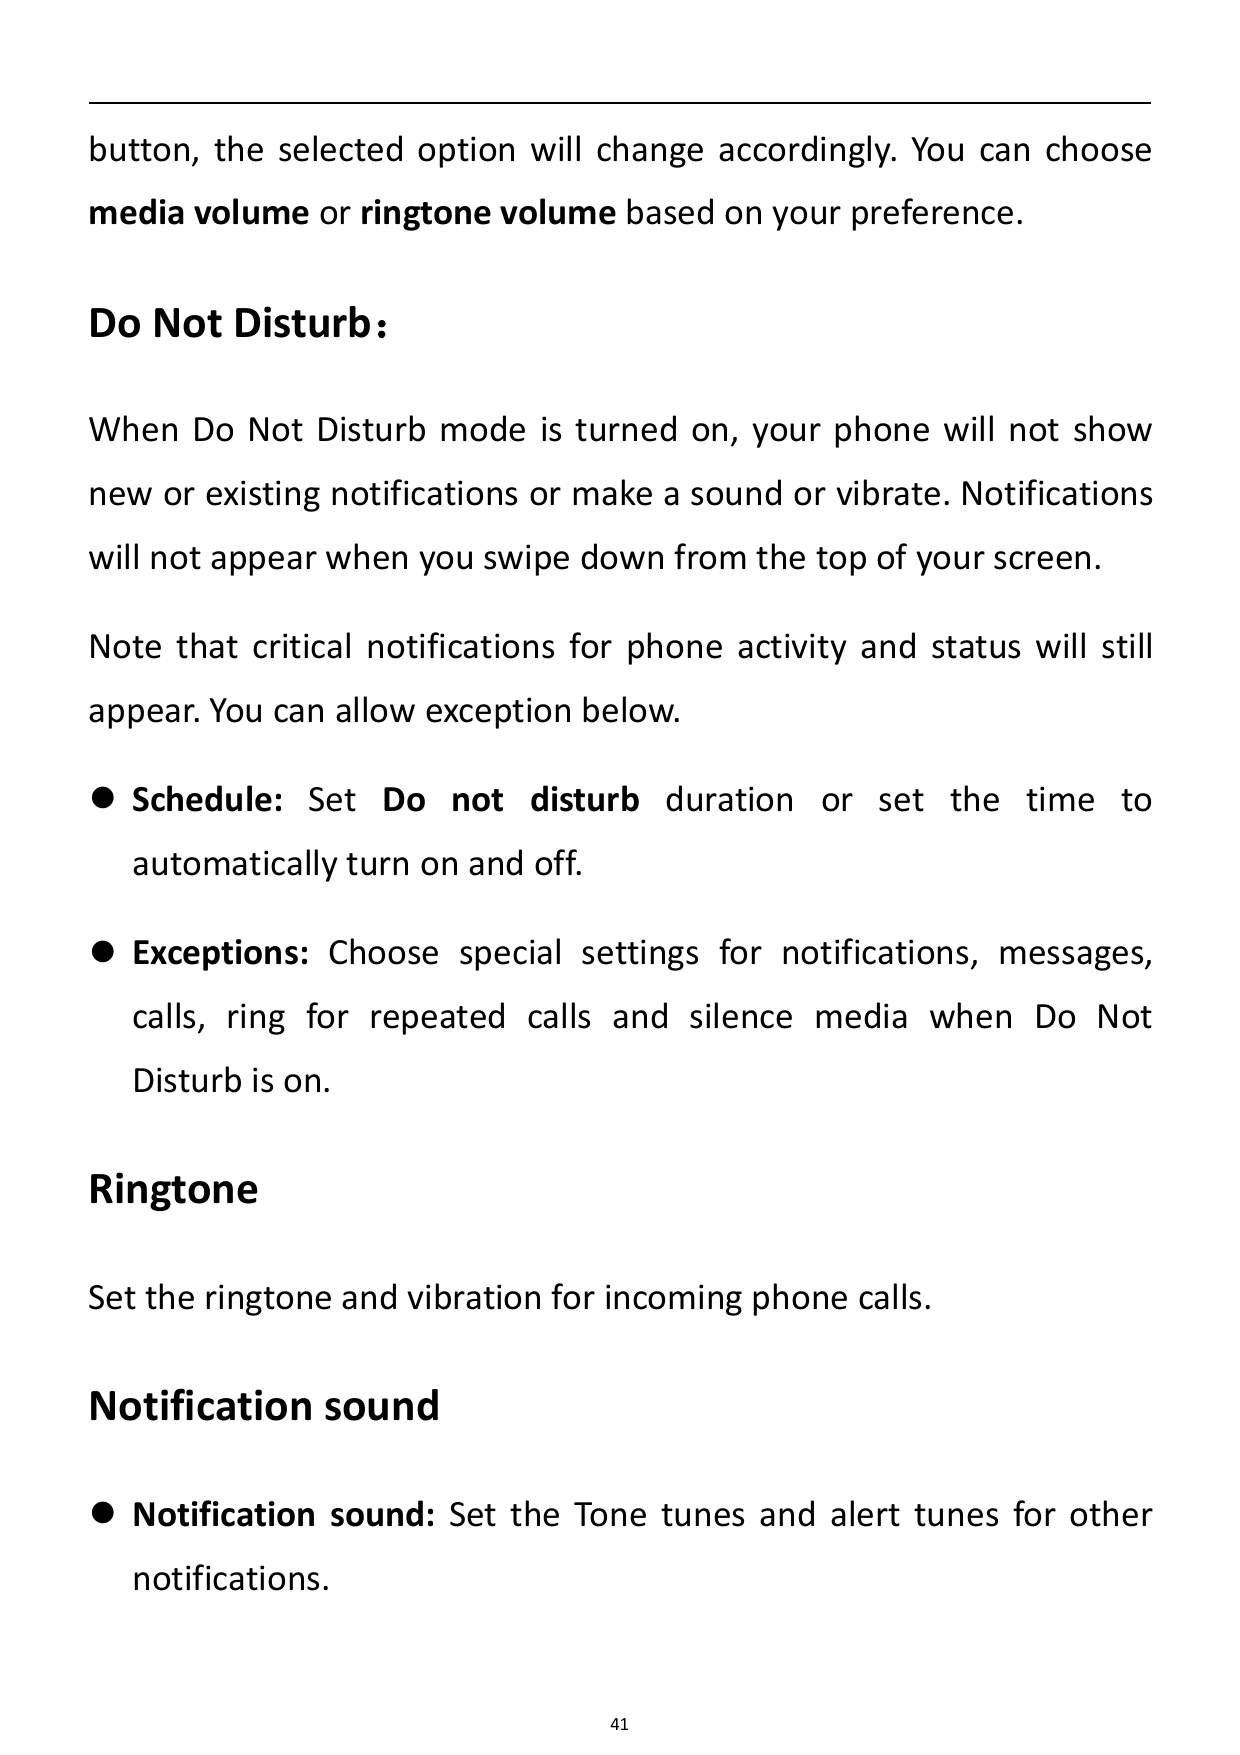 button, the selected option will change accordingly. You can choosemedia volume or ringtone volume based on your preference.Do N